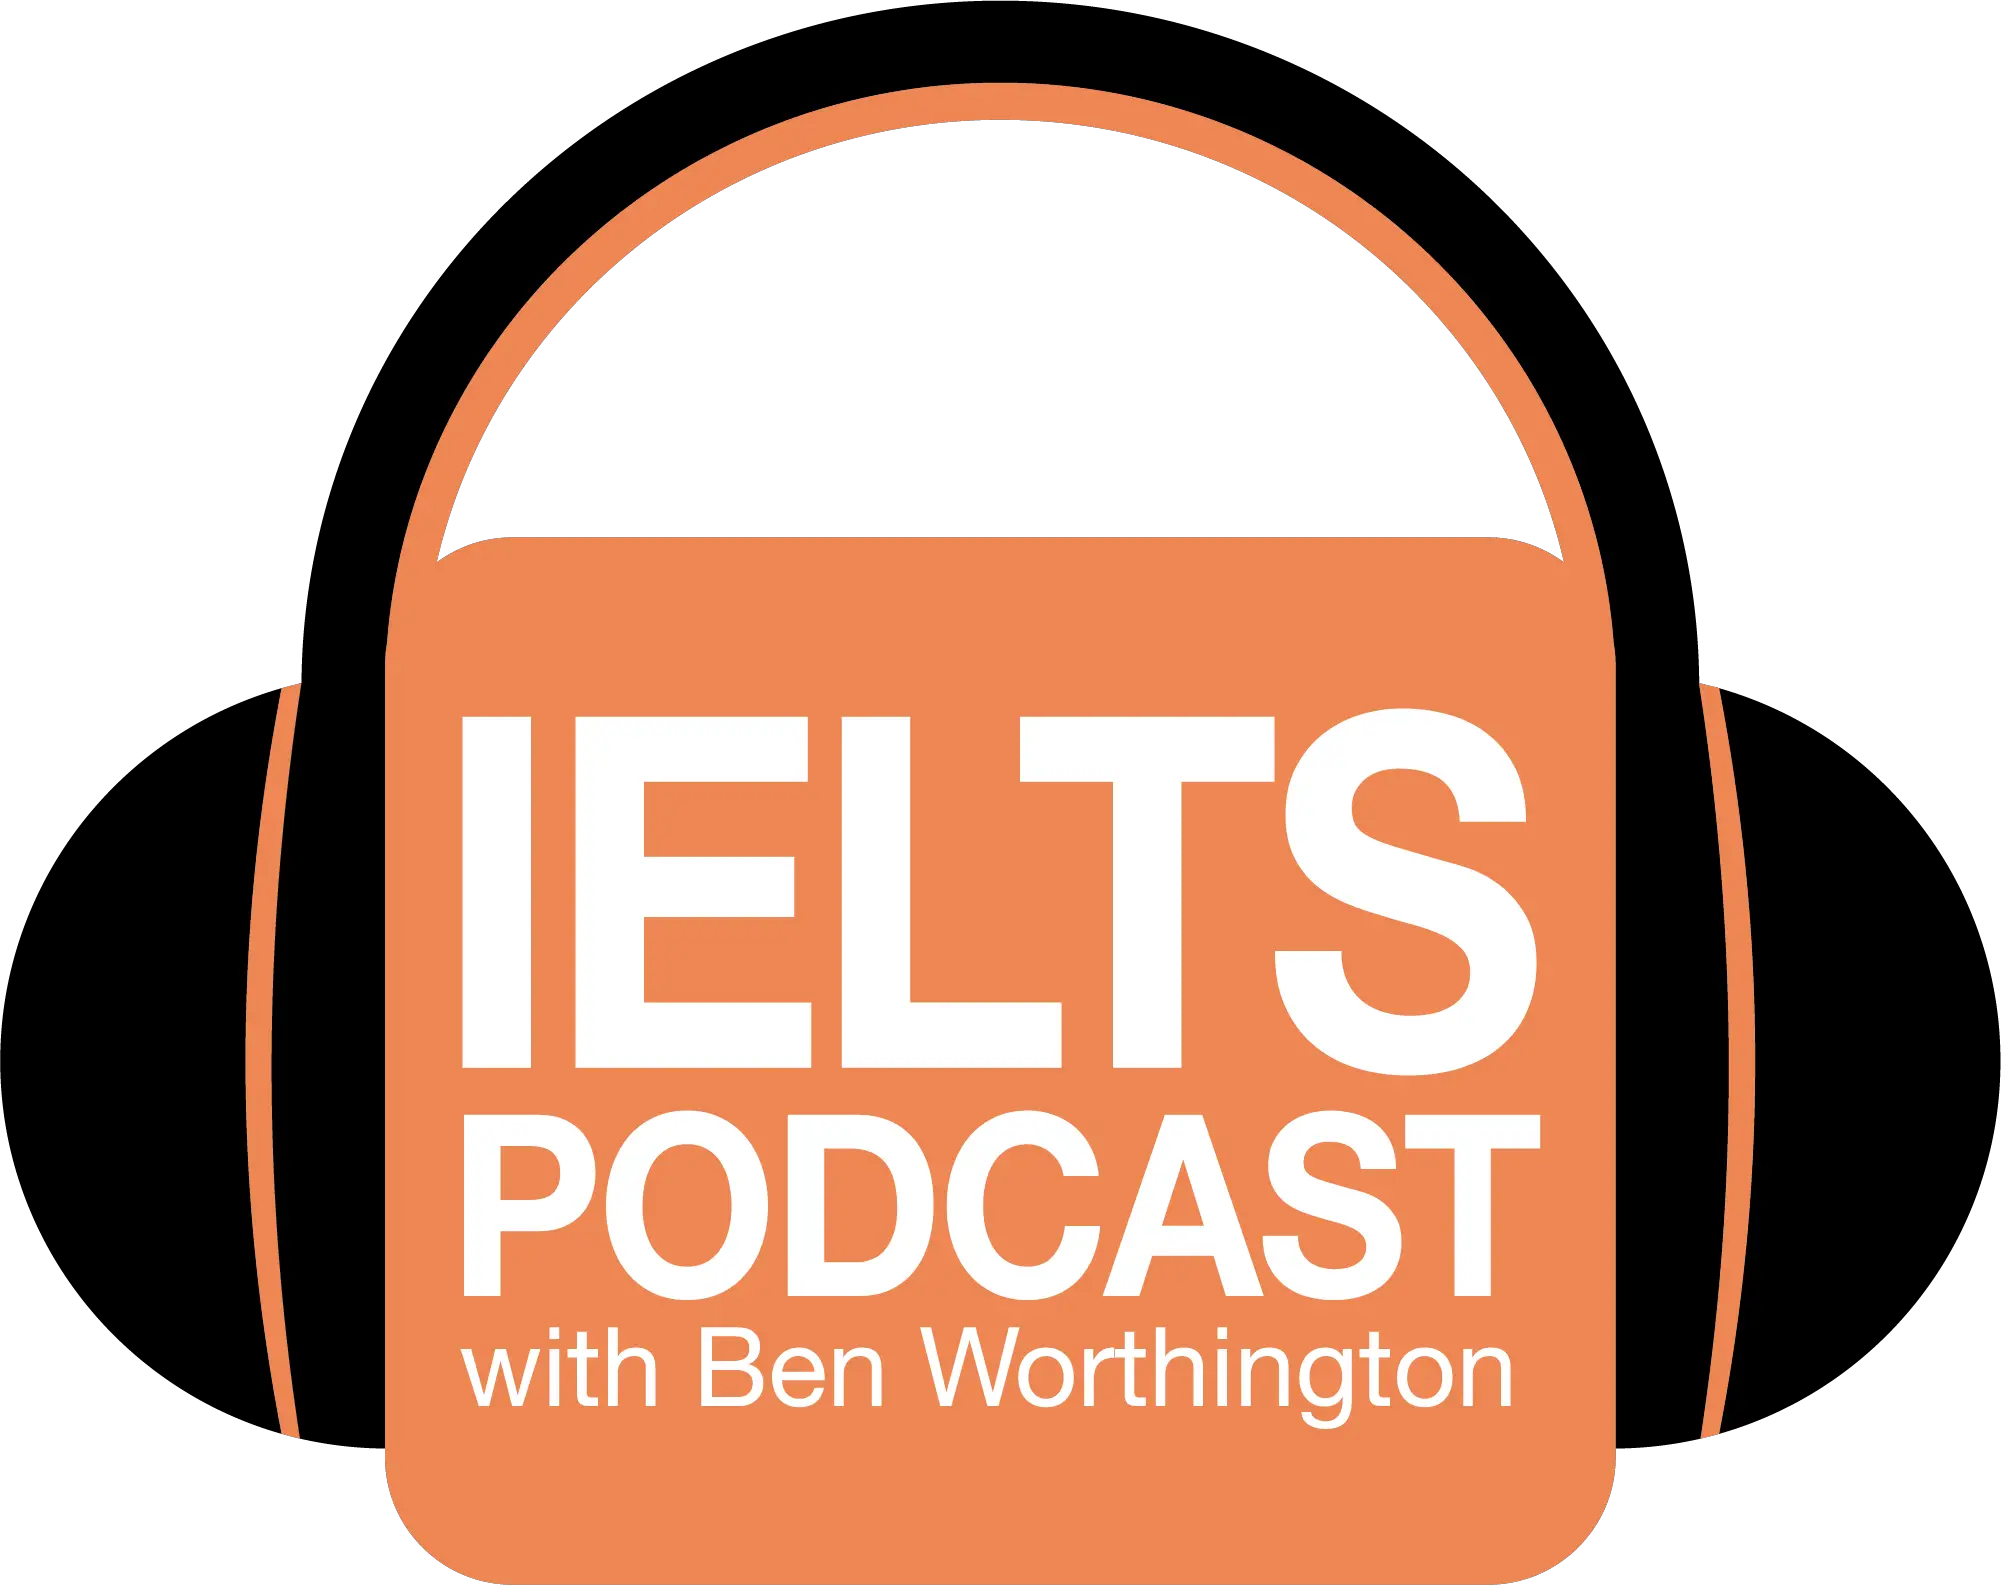 Prepare For Your IELTS Exam With IELTS Podcast